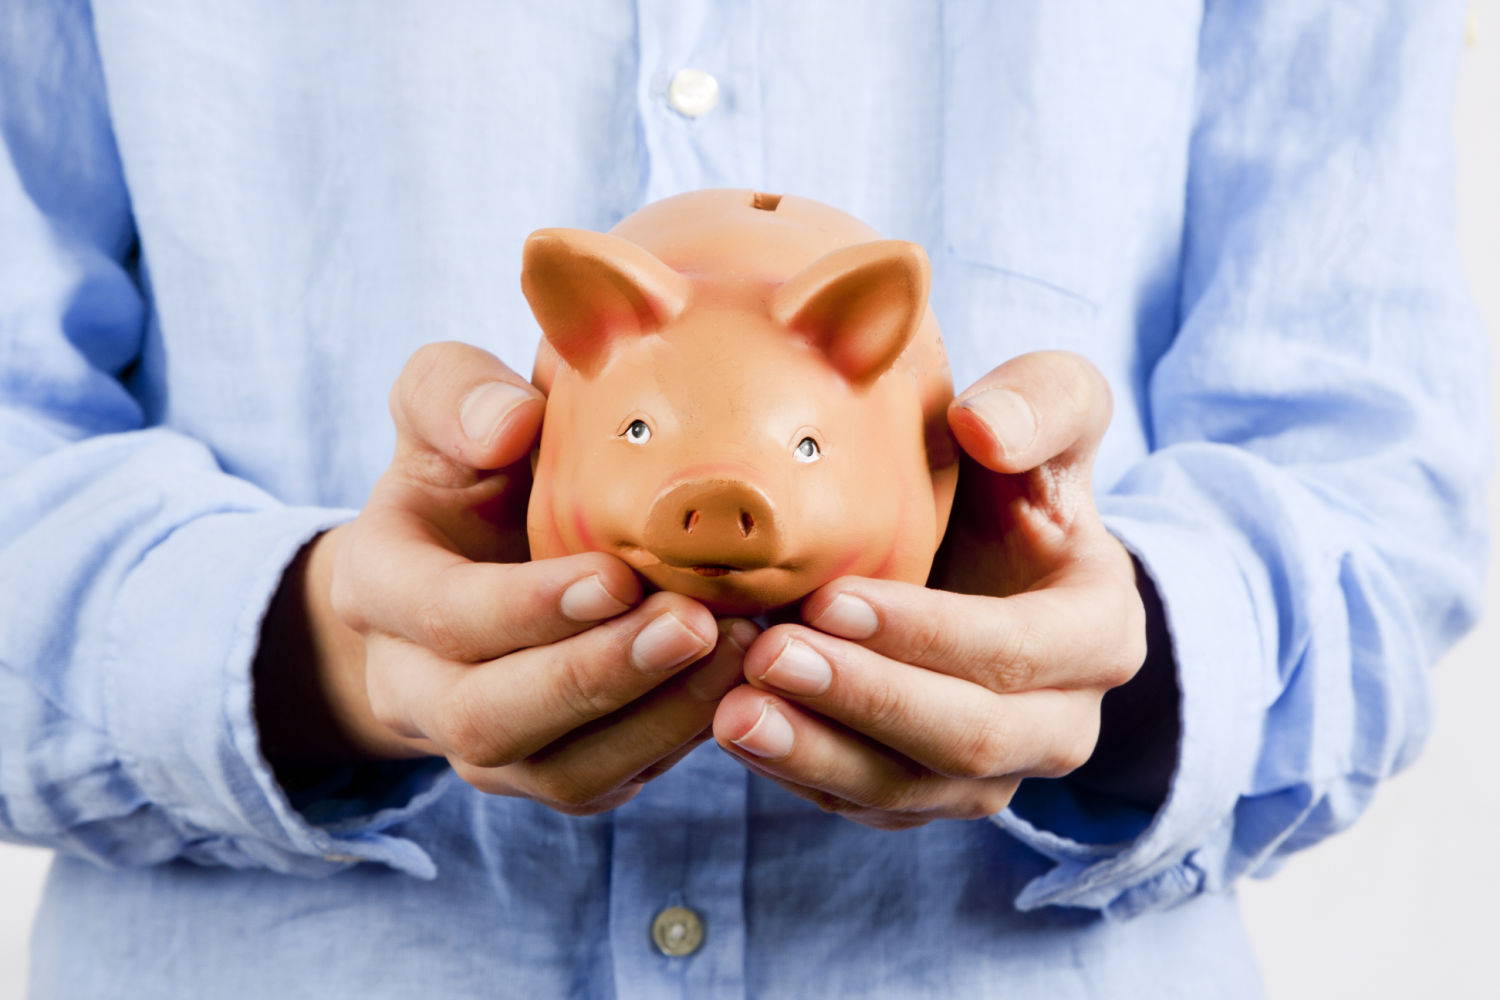 A person in a blue shirt holding out their piggy bank in their hands